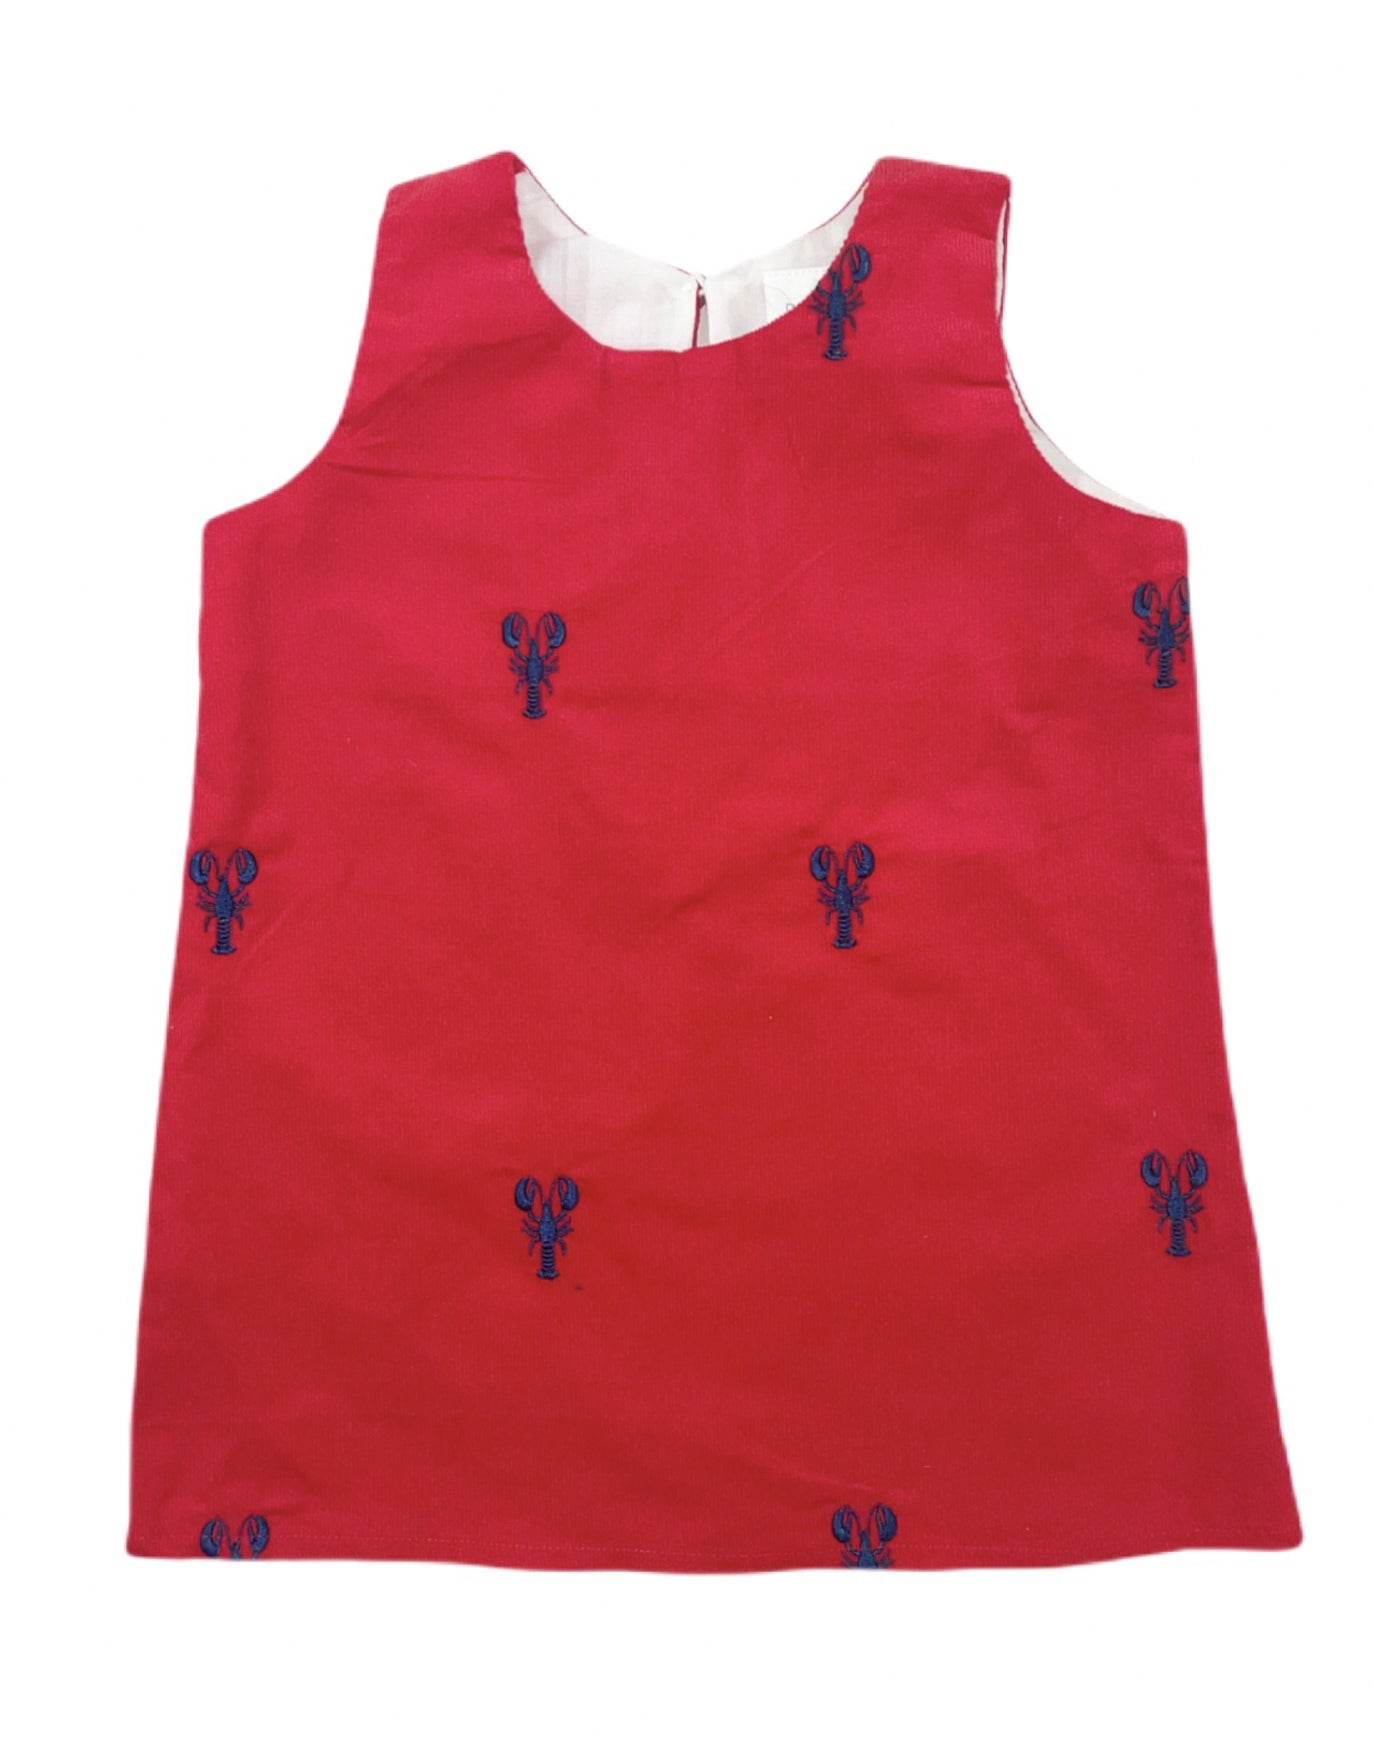 Red Corduroy Jumper Dress with Navy Lobsters